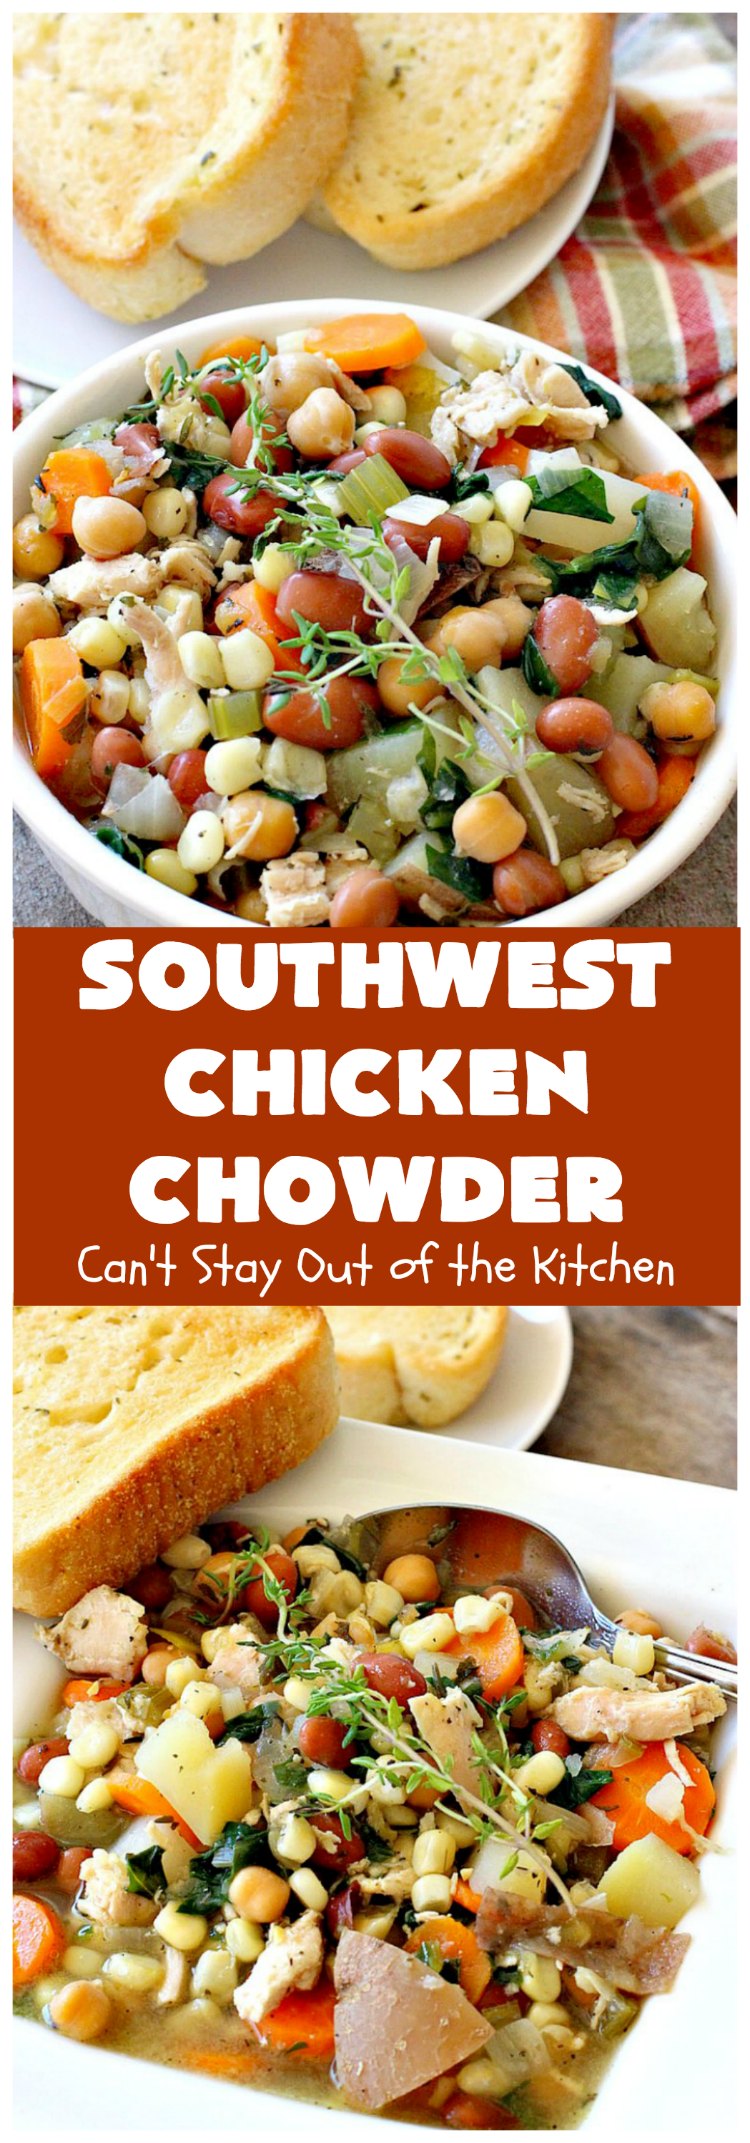 Southwest Chicken Chowder | Can't Stay Out of the Kitchen